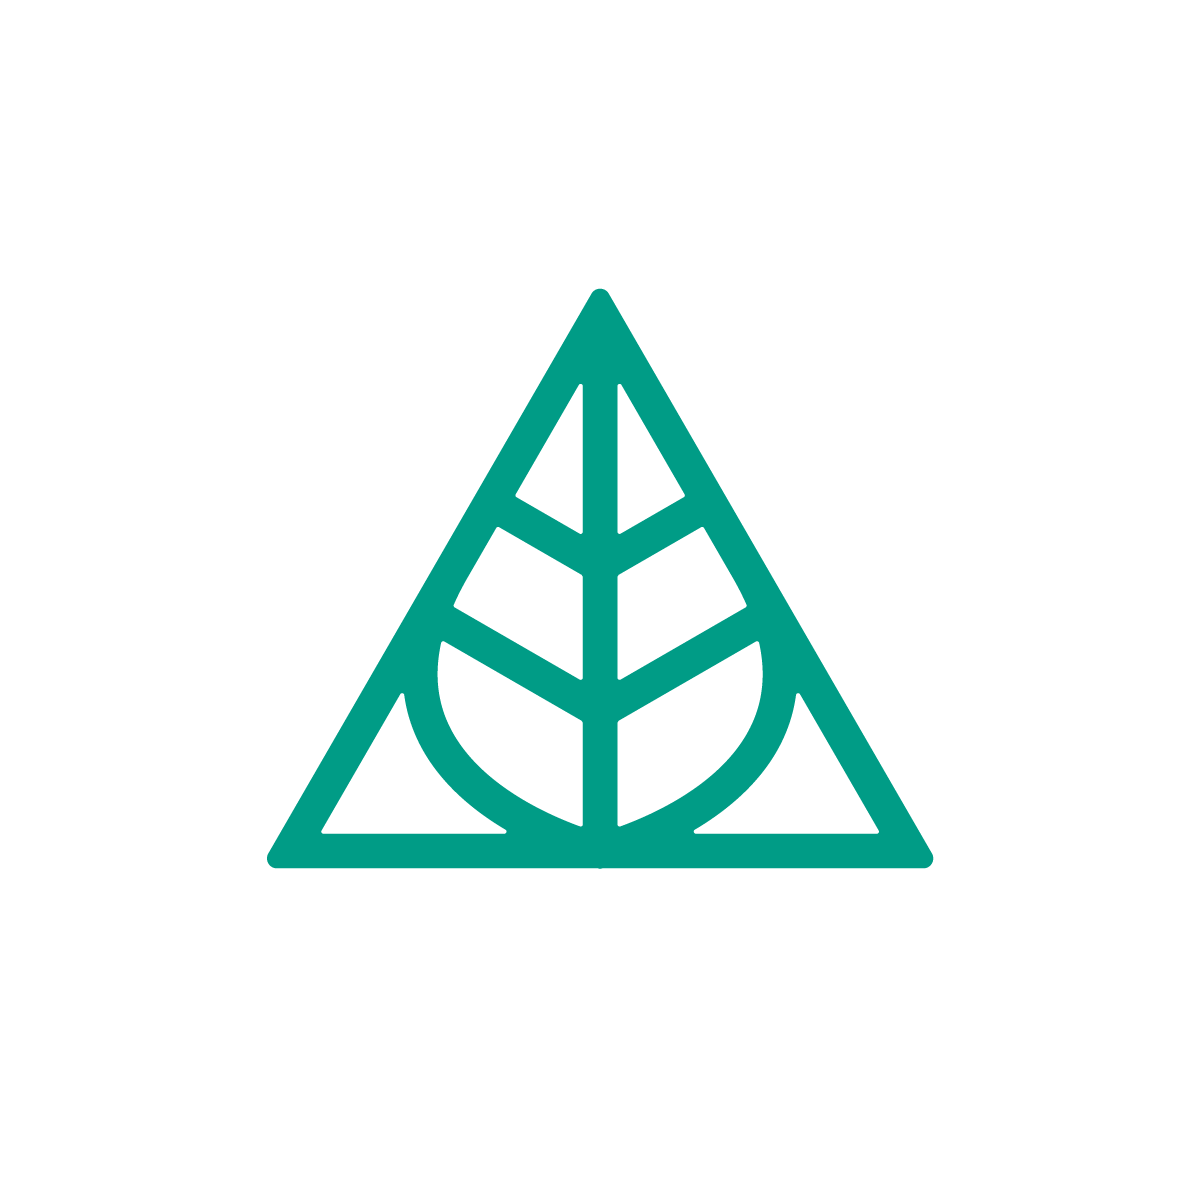 Triangle Leaf Logo elegantly blends lines, triangular form, and a leaf shape, symbolizing simplicity, vitality, balance, and growth. Perfect for environmentally conscious brands, the logo signifies harmony and a connection to nature with a clean, impactful design.